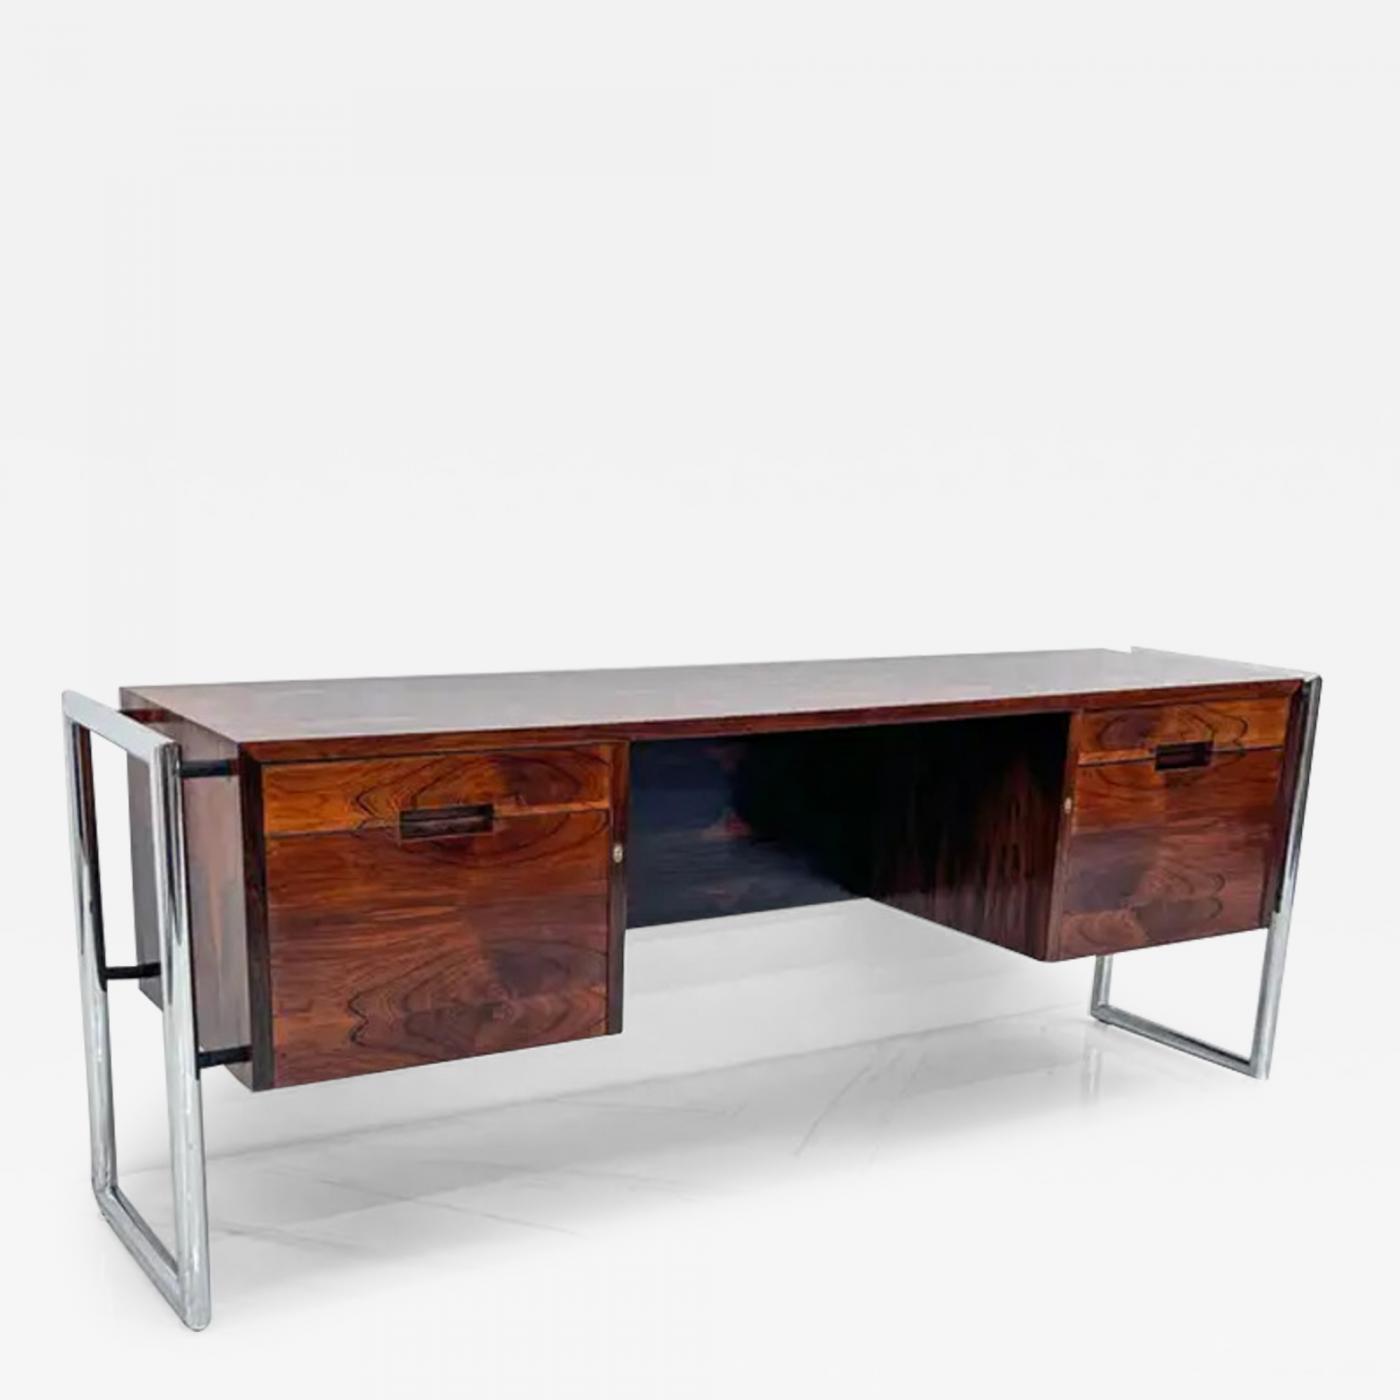 SUPER COOL 1970'S SPACE AGE MOD TUBULAR CHROME DESK W ROSEWOOD TOP